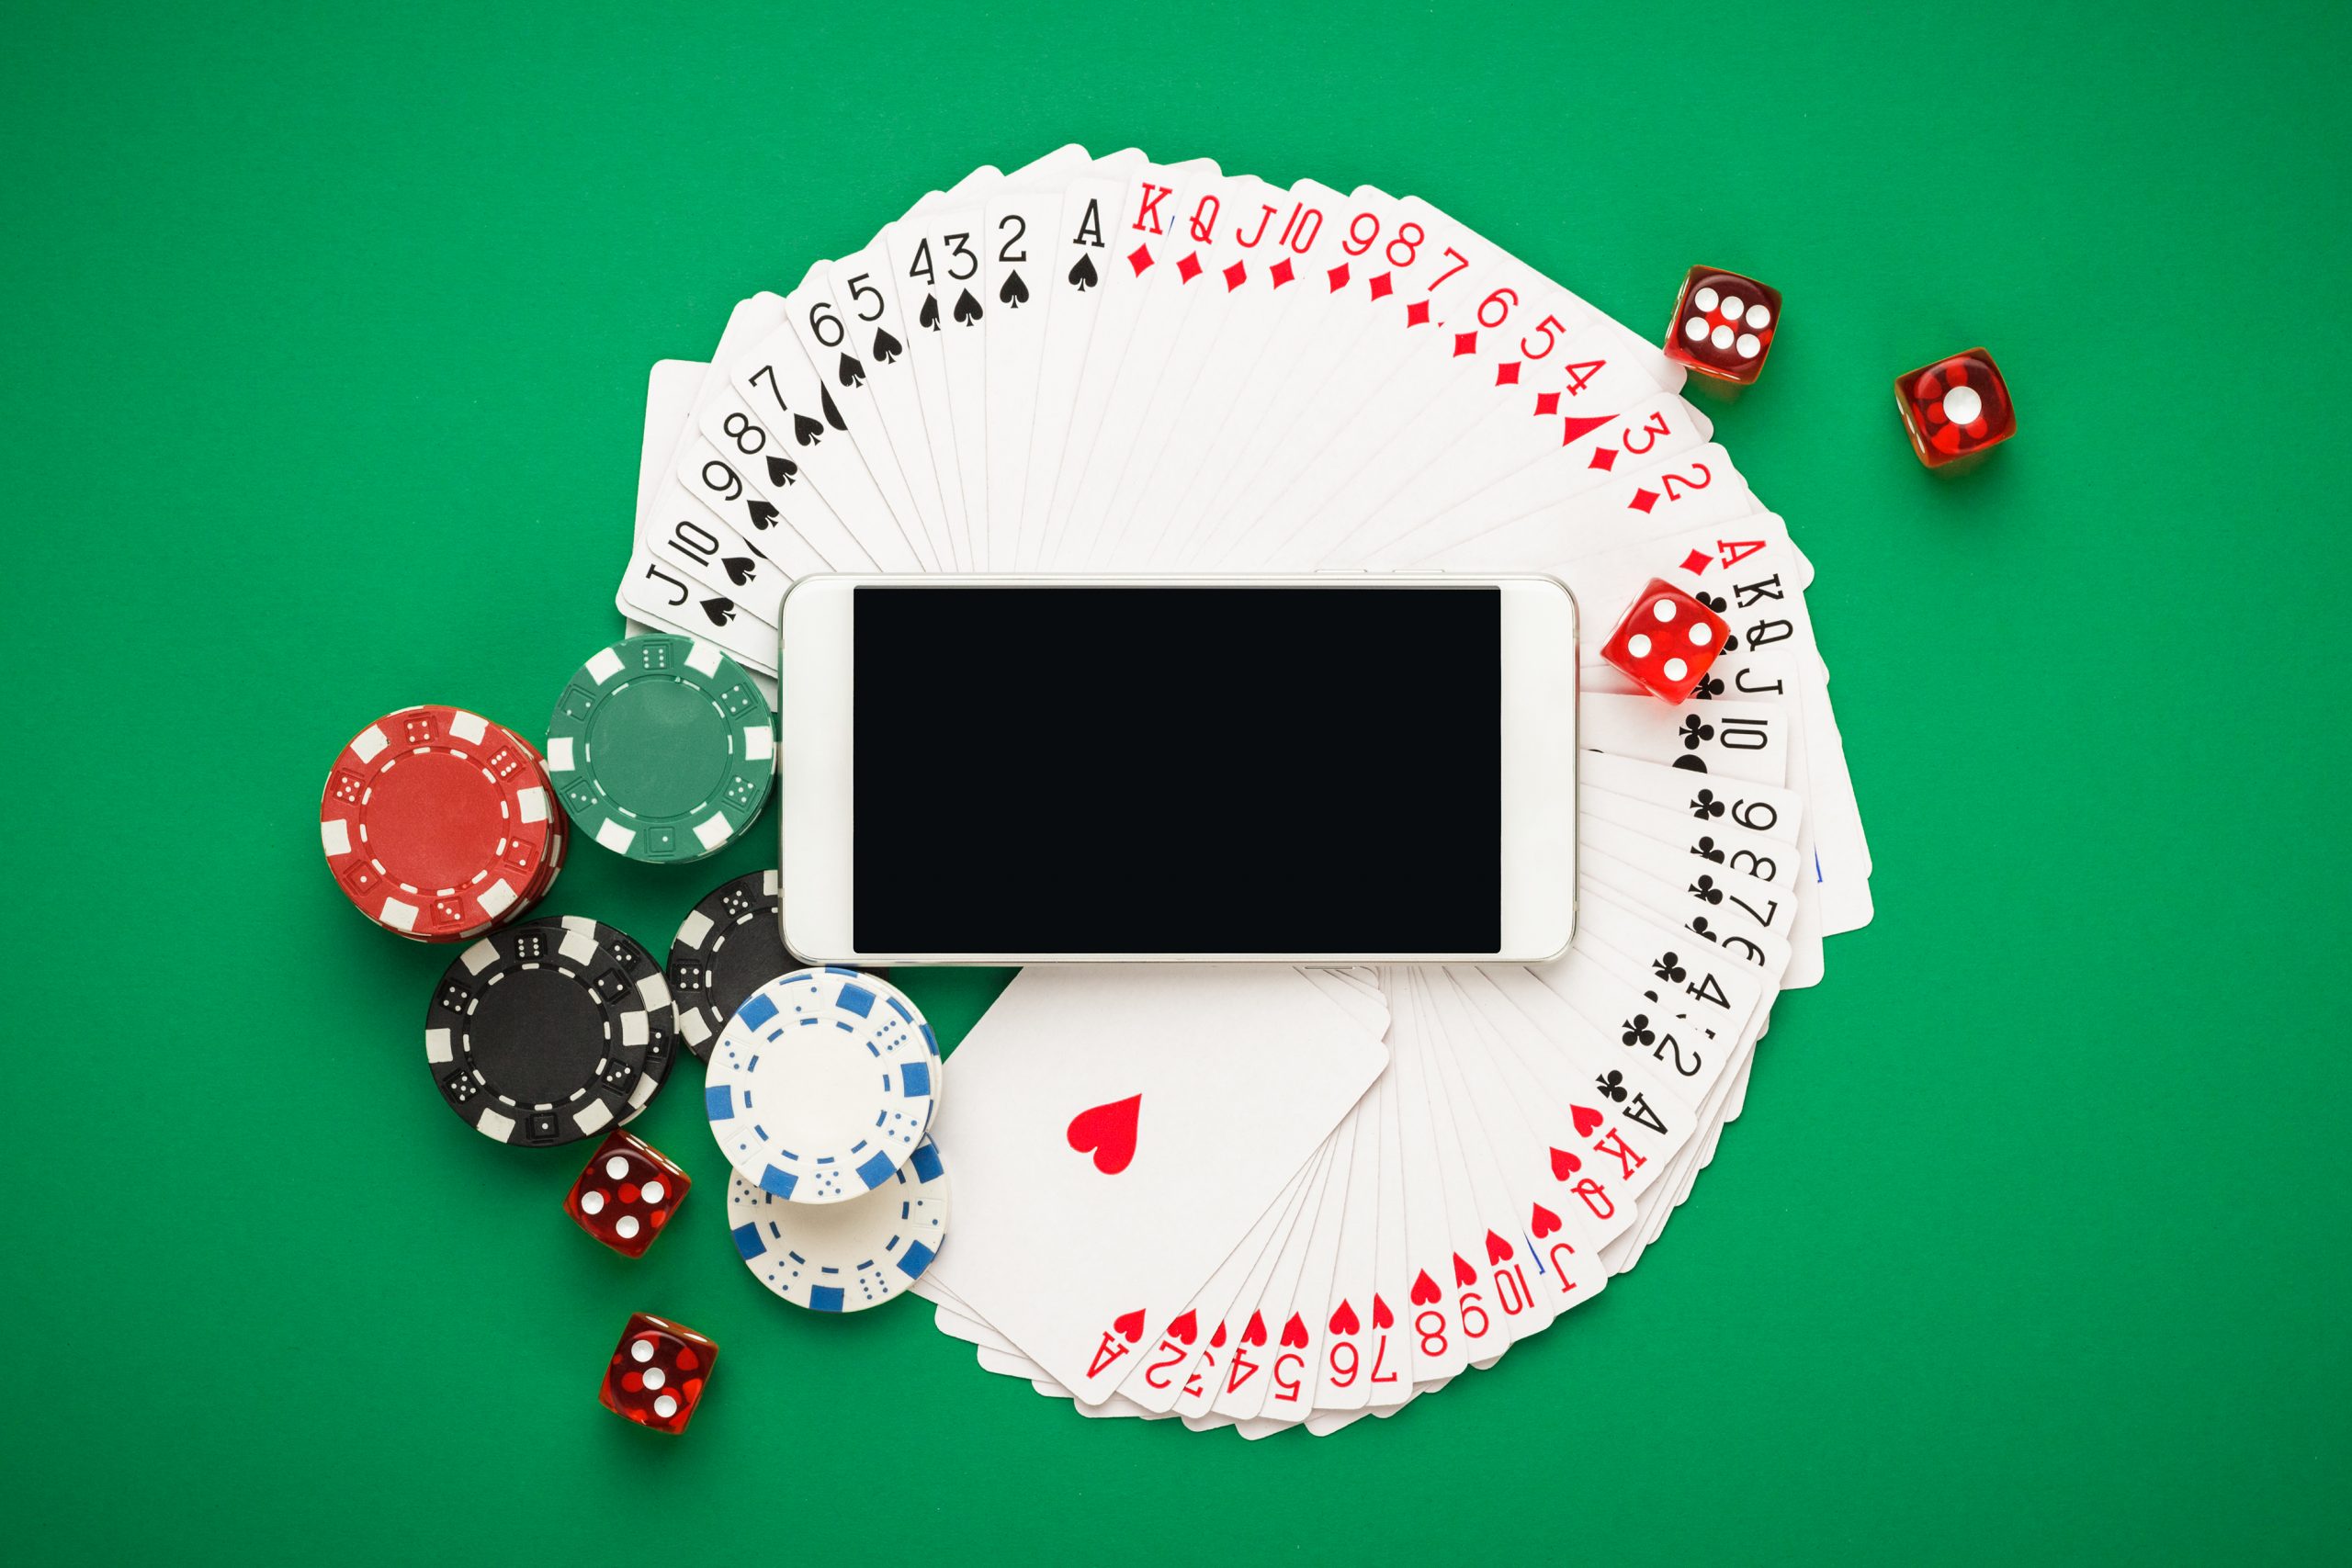 Step Into the Virtual Casino and Play Live Games Online